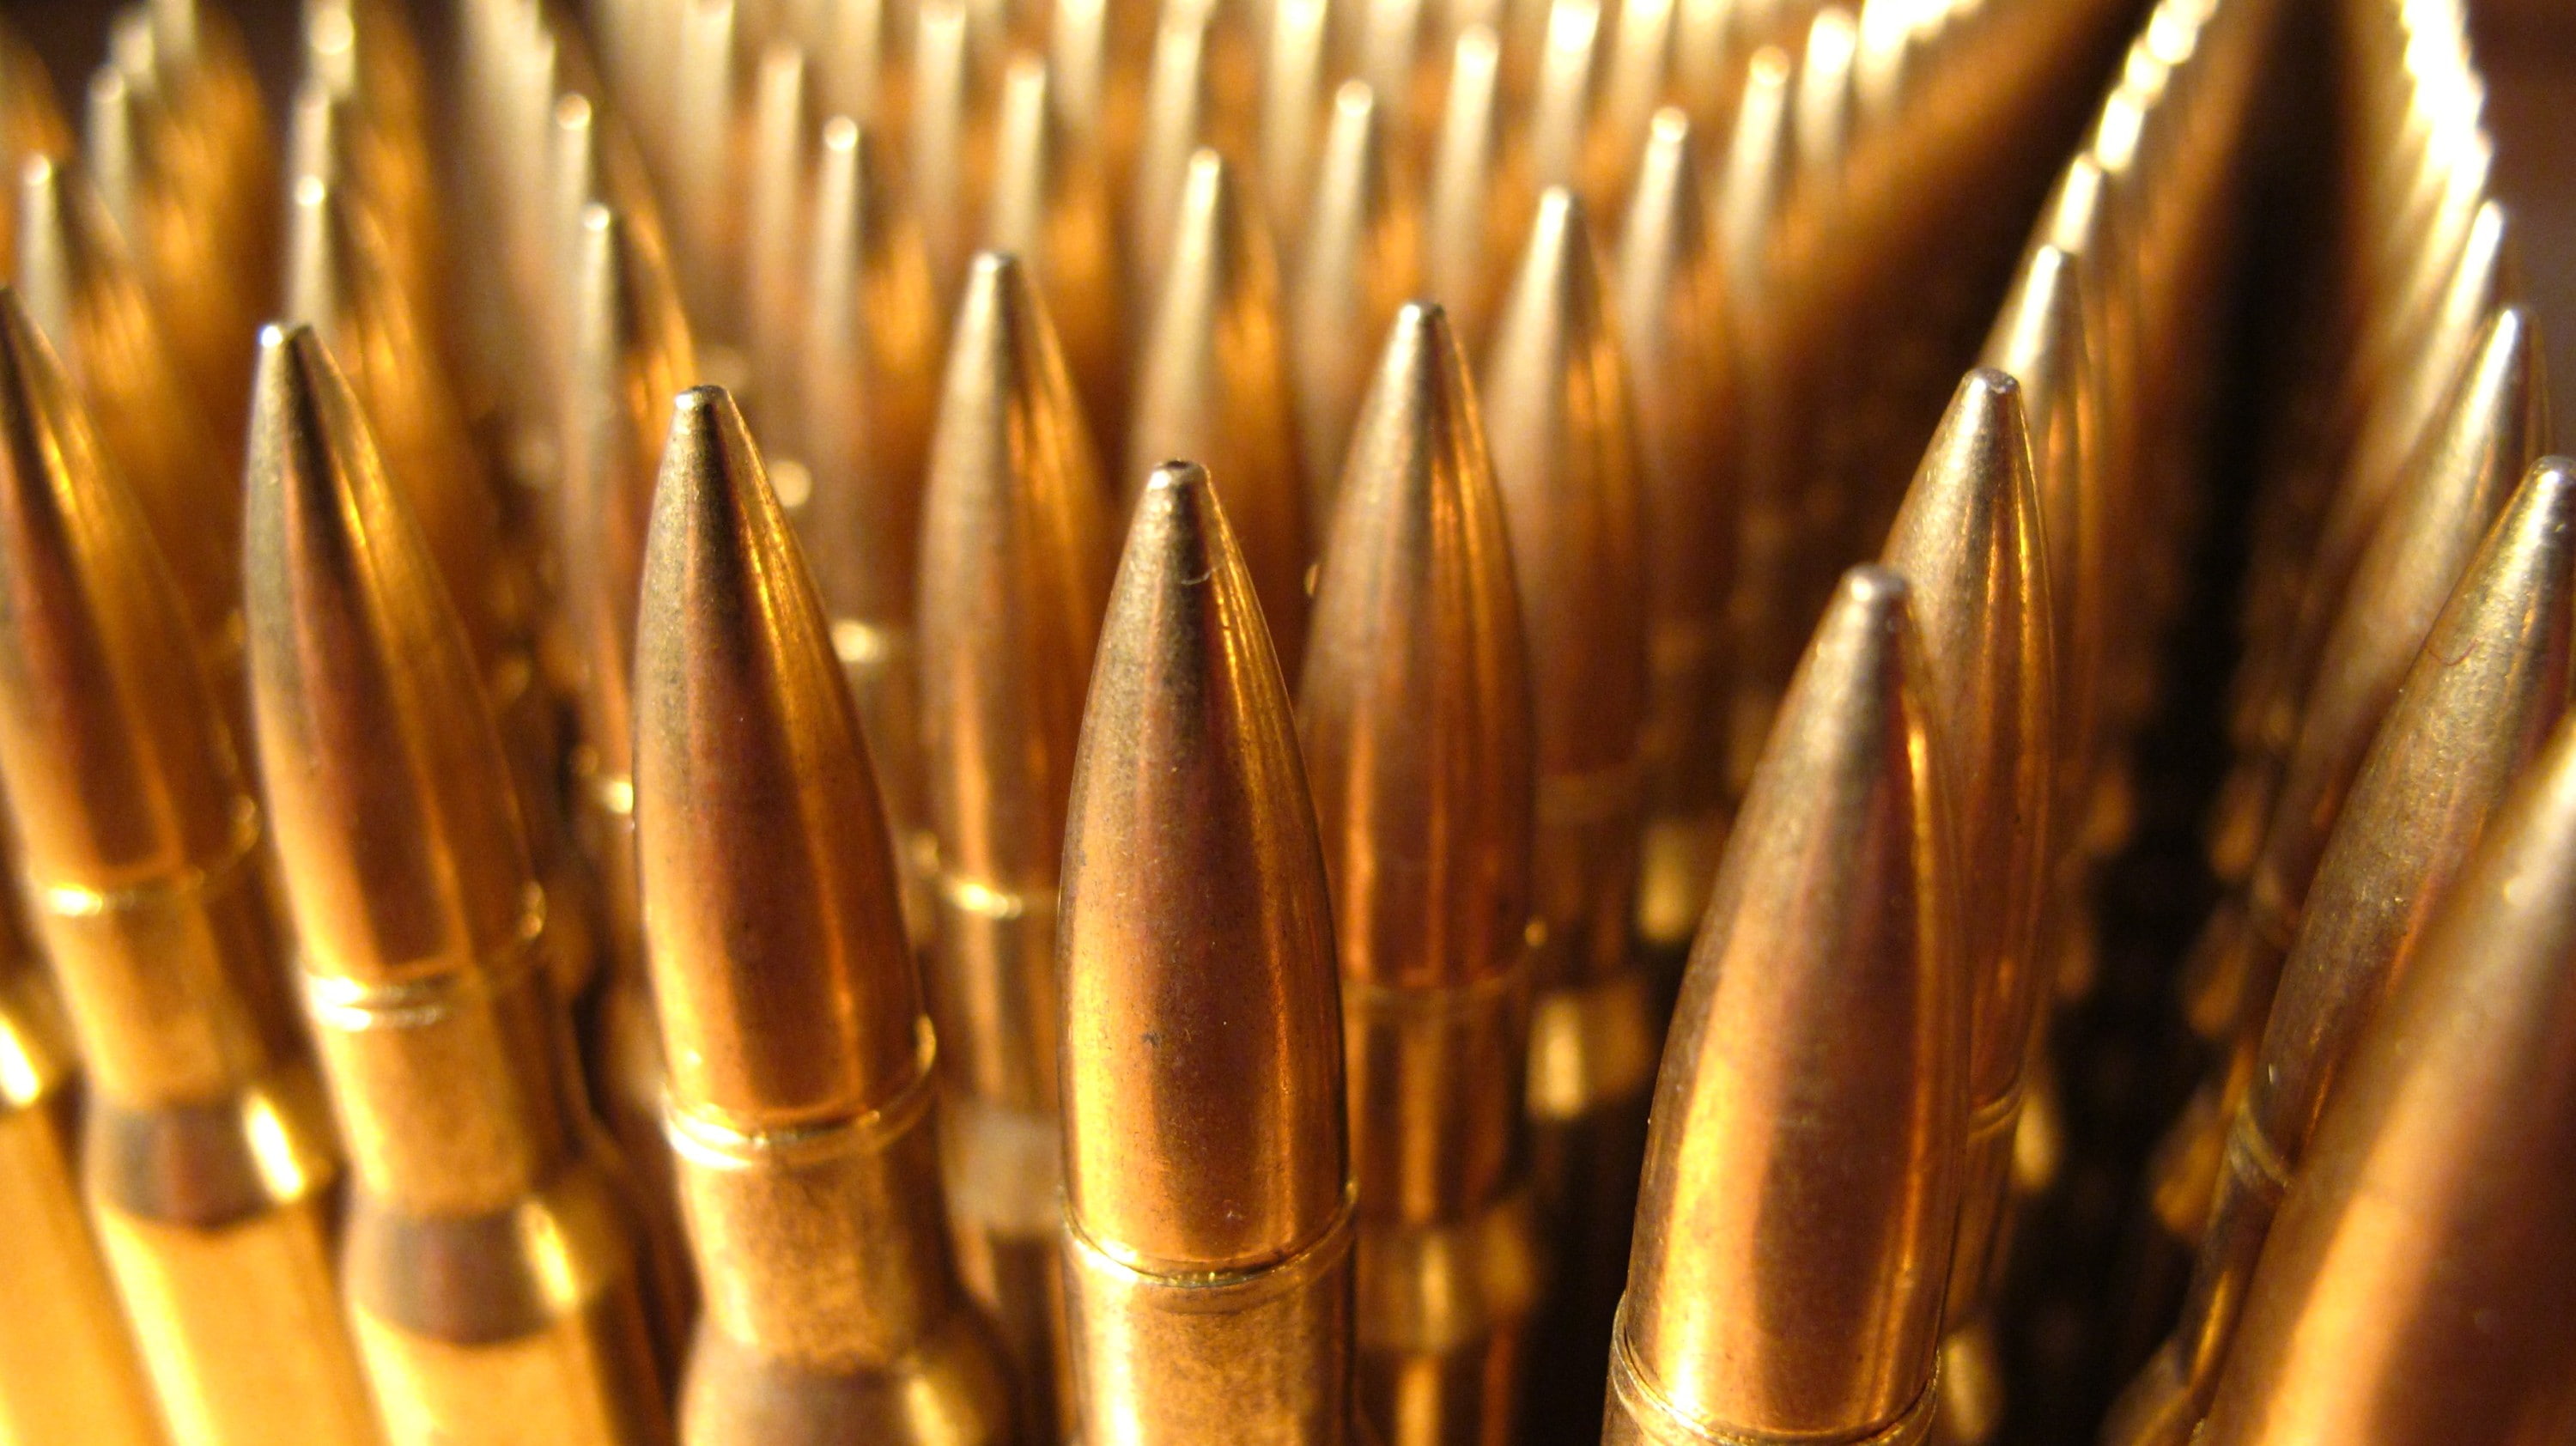 ammunition, macro, violence, bullet, gold colored, weapon, no people